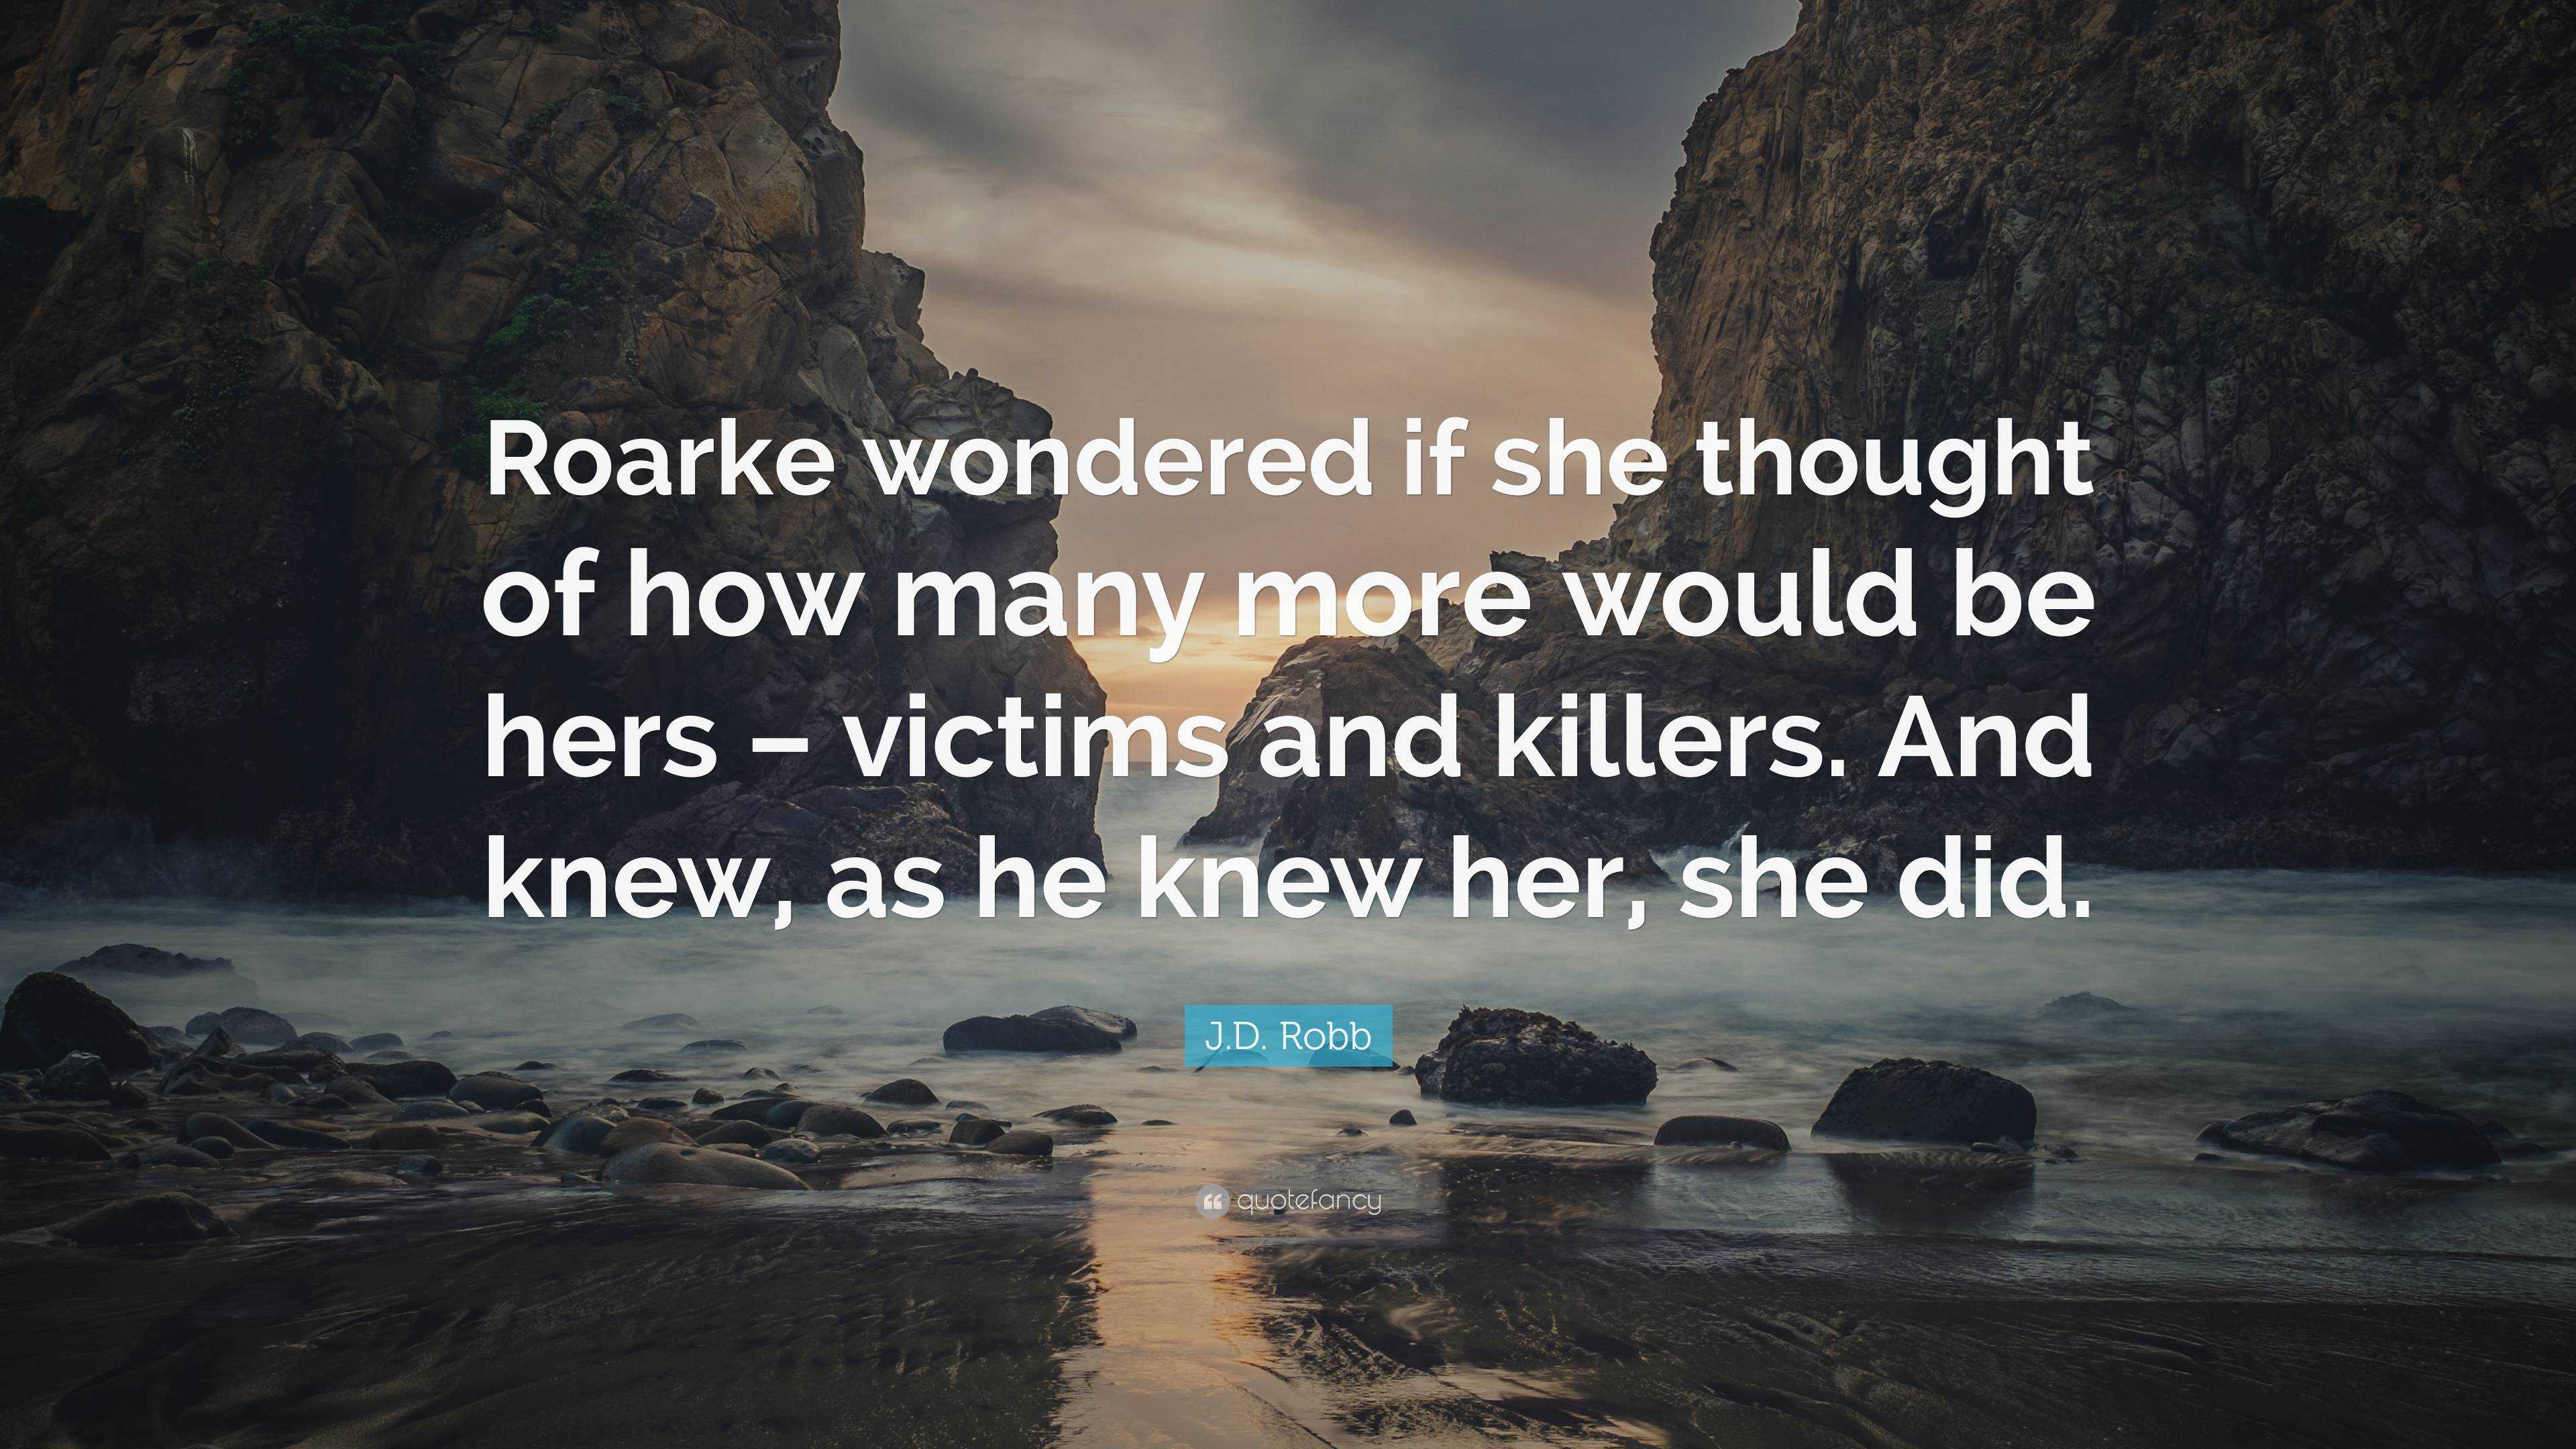 J.D. Robb Quote: “Roarke wondered if she thought of how many more would ...